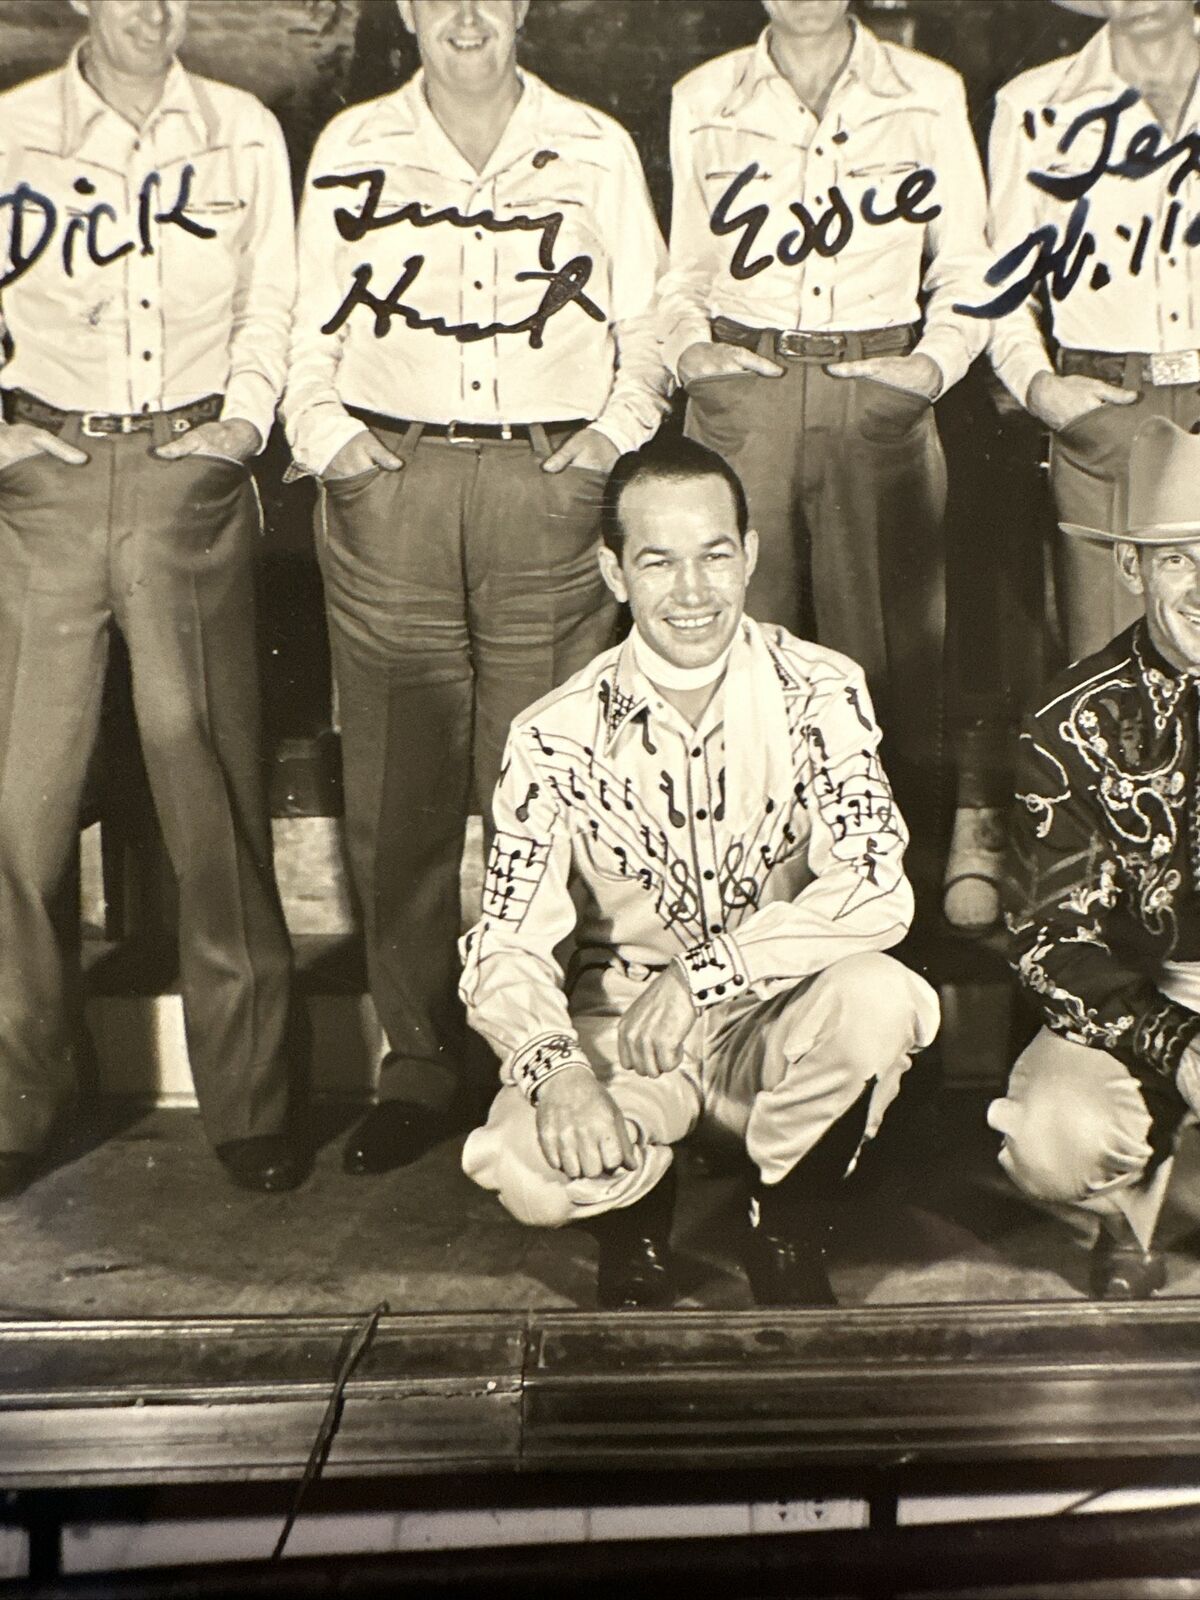 Spade Cooley’s Barn Dance Boys photo signed Foreman Phillips County Vintage RARE